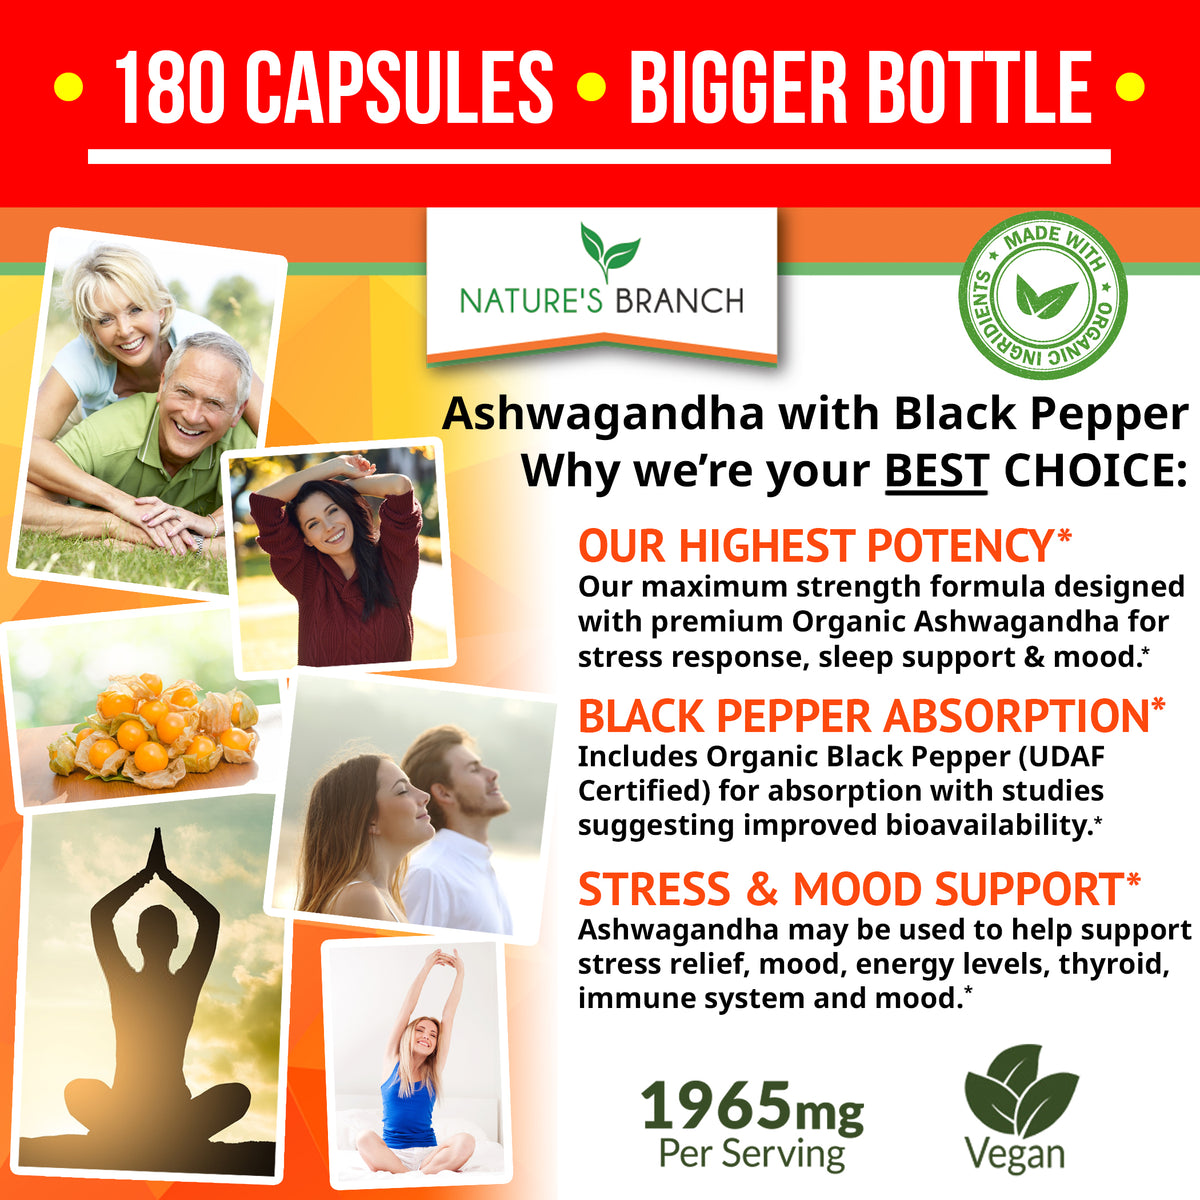 Nature&#39;s Branch Organic Ashwagandha and Black Pepper benefits showing 180 capsules, the strength and stress support